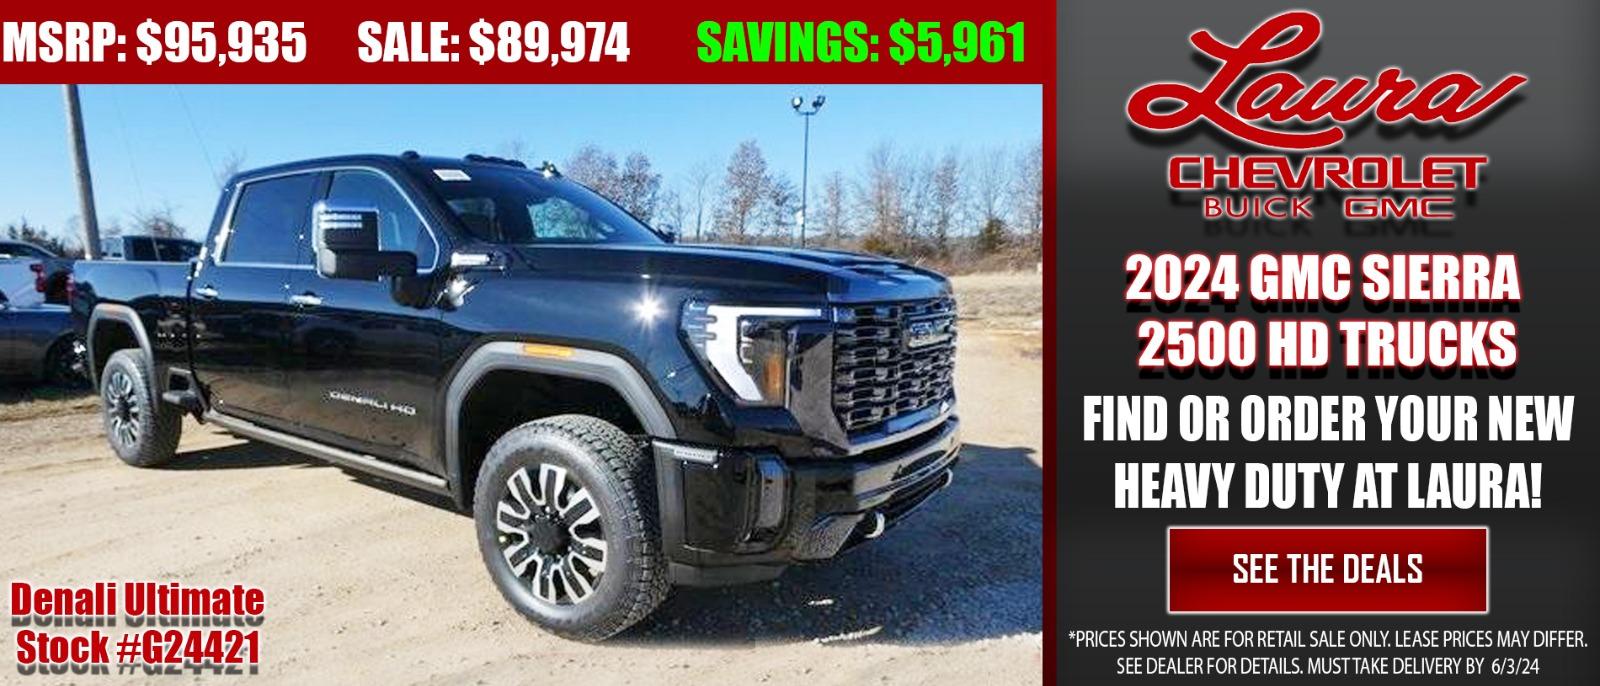 Find or order your new 2023 GMC Sierra 2500HD pickup this month at Laura Chevrolet Buick GMC, just a short drive from St. Louis!